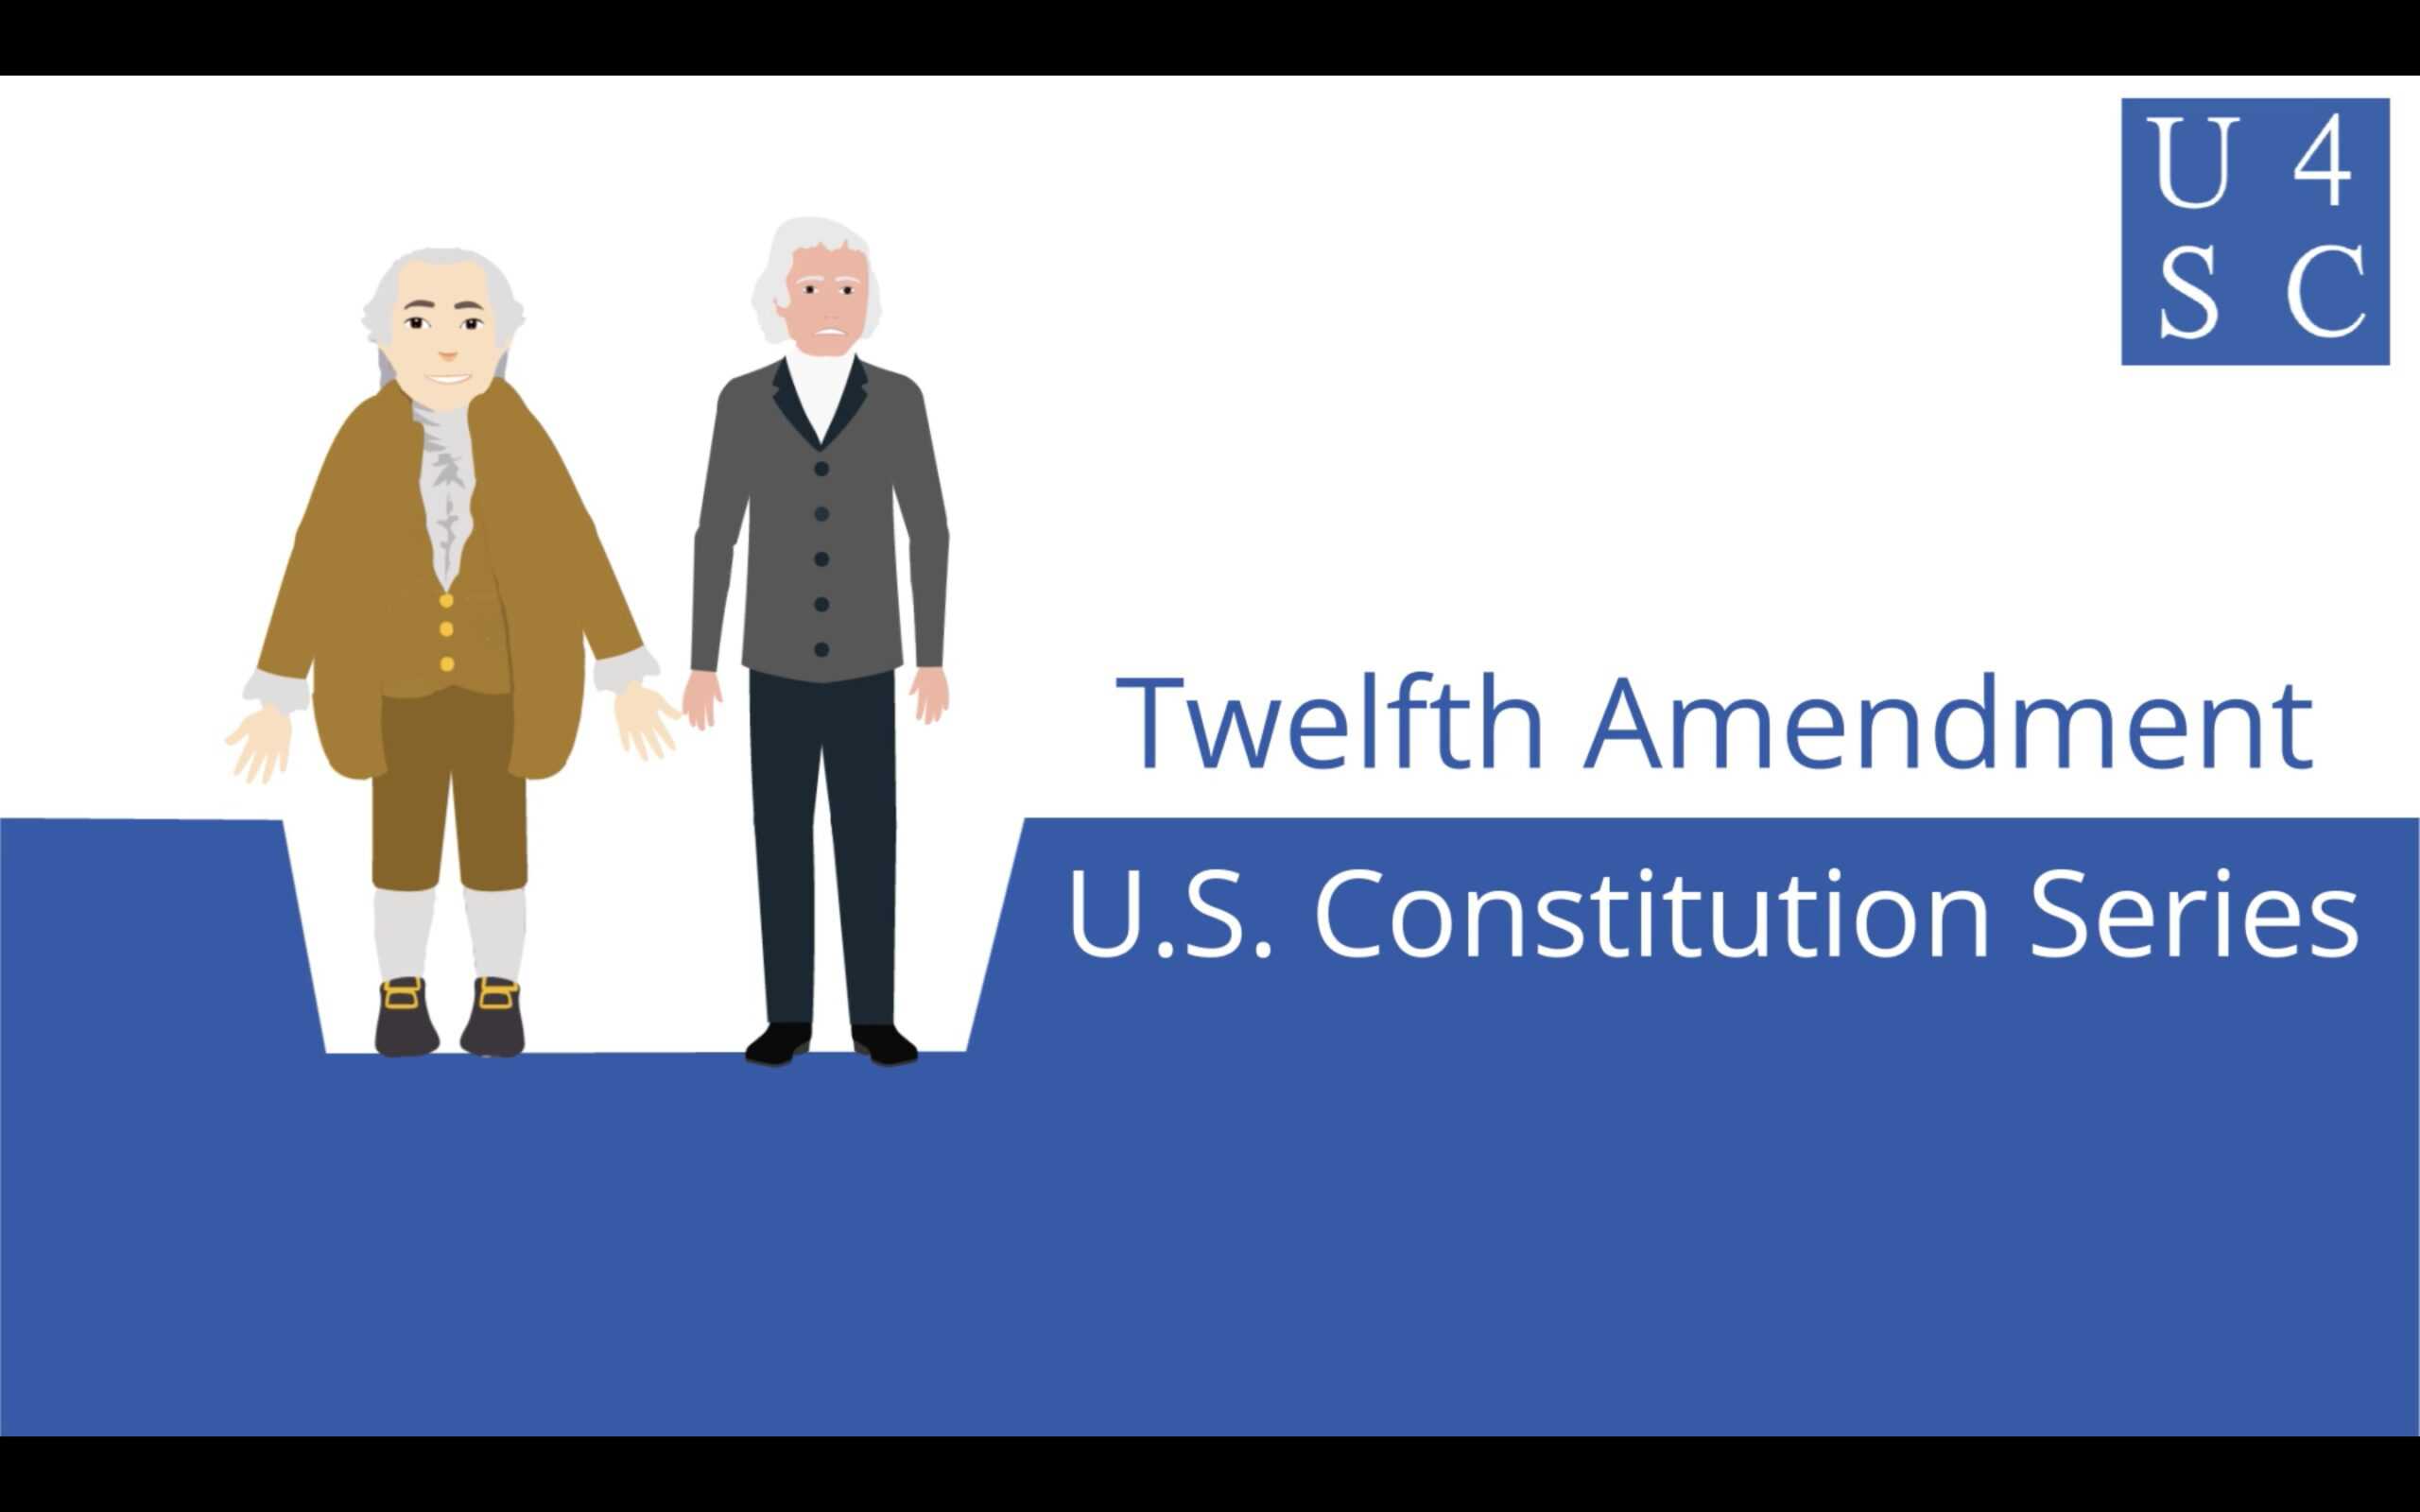 What is The 12th Amendment?